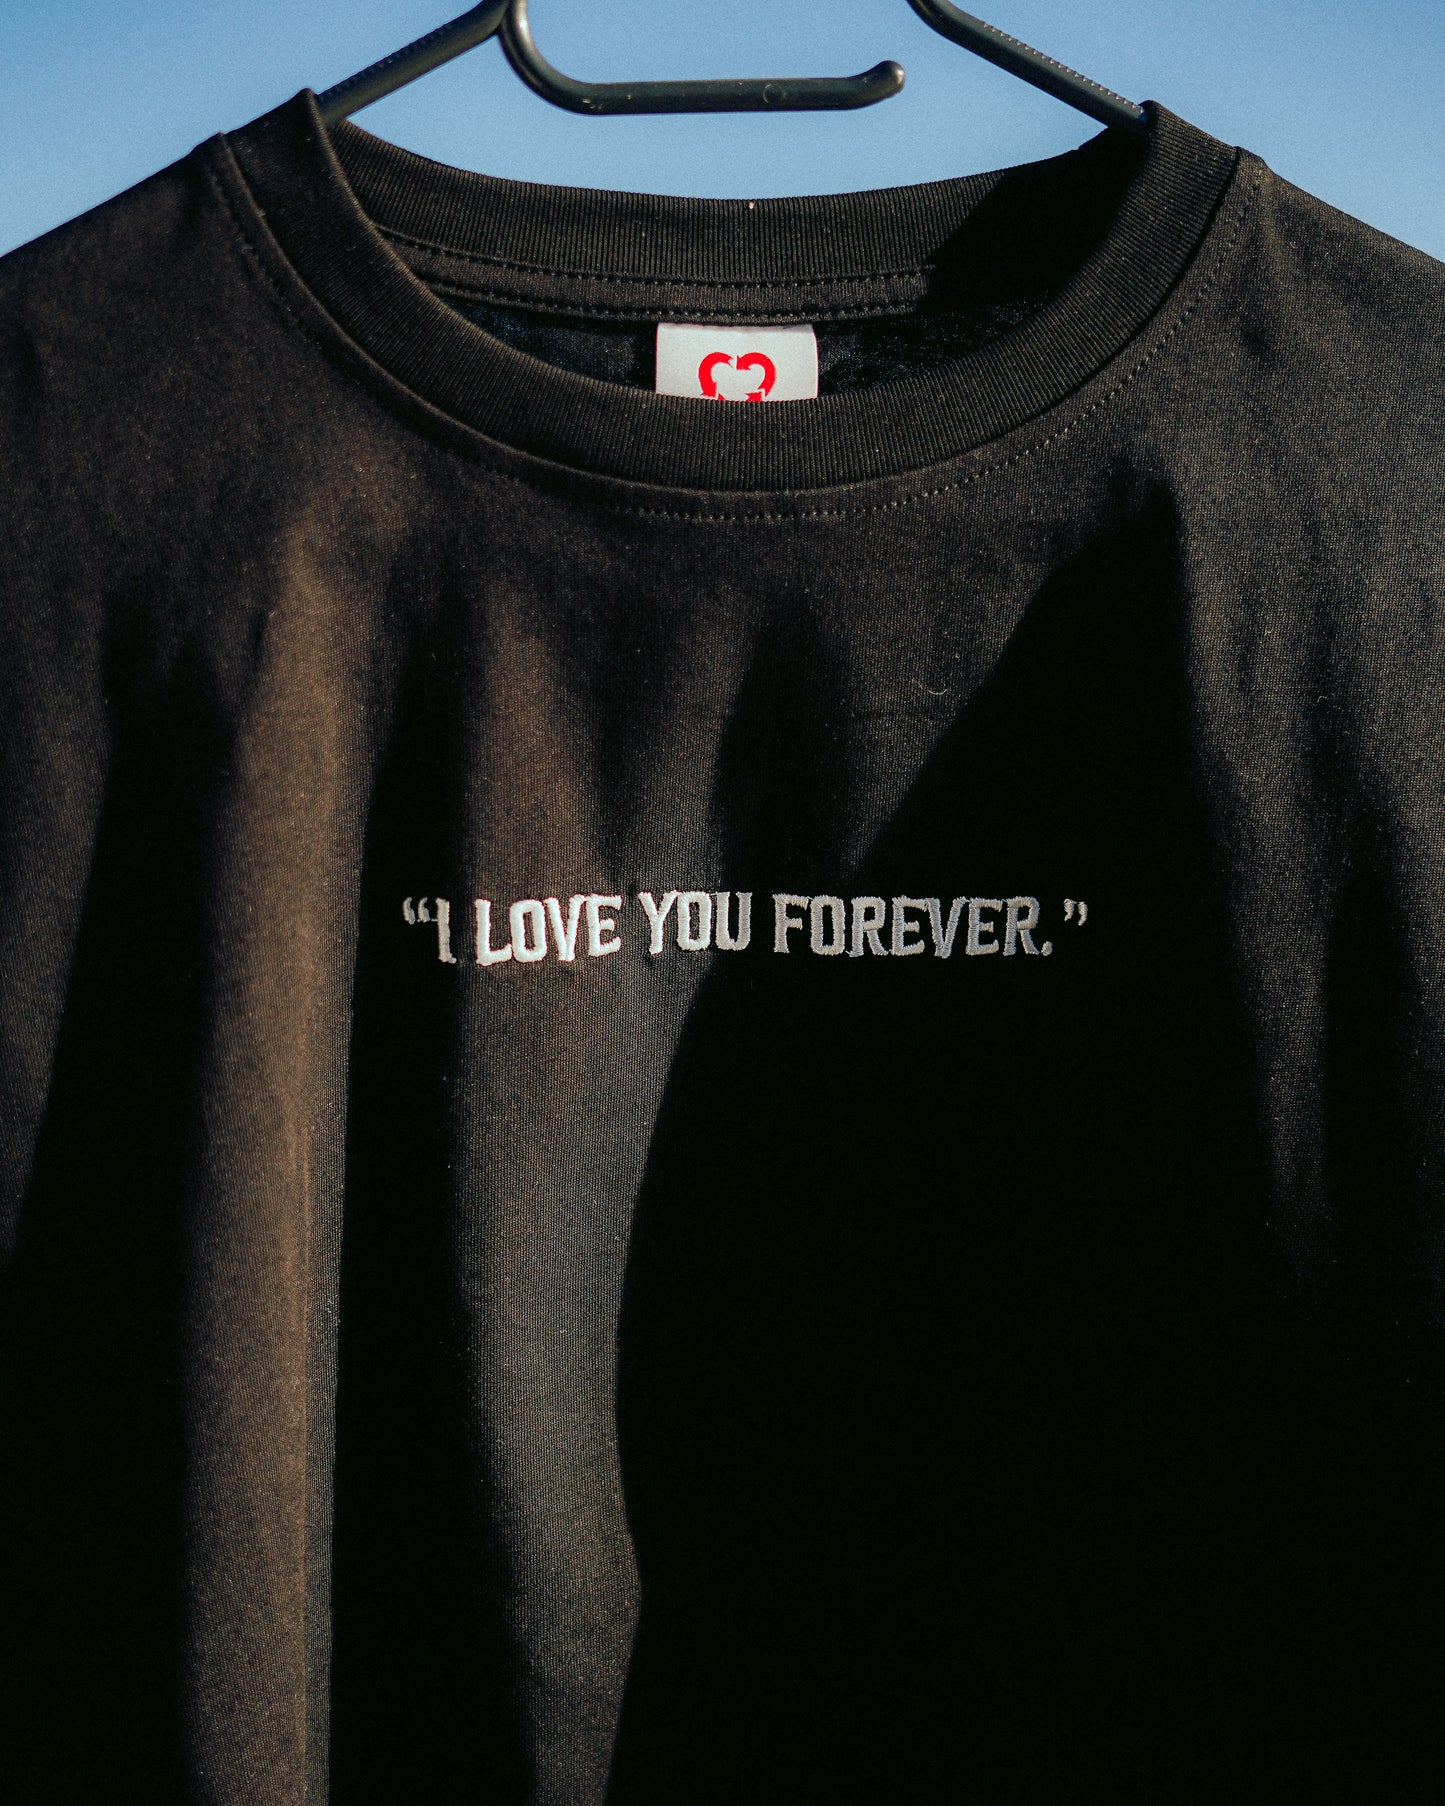 "I LOVE YOU FOREVER." CROP TOP